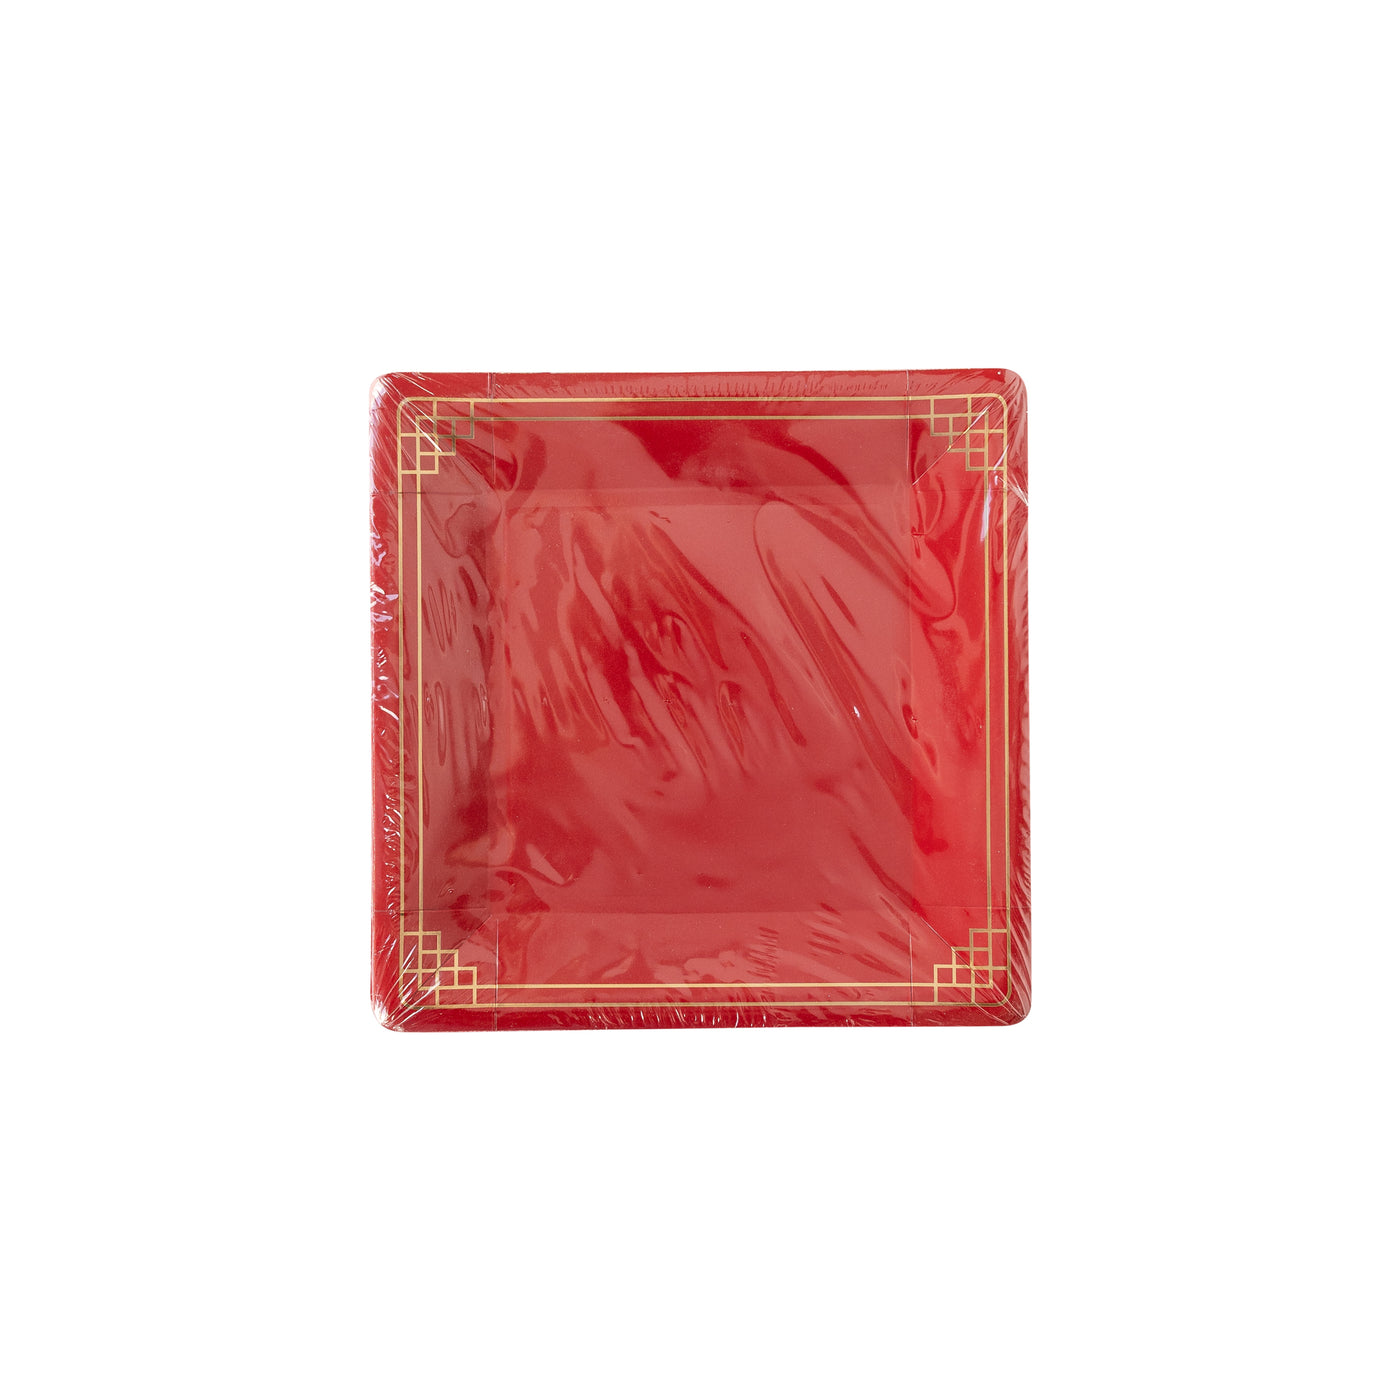 Lunar New Year Square Border Plate